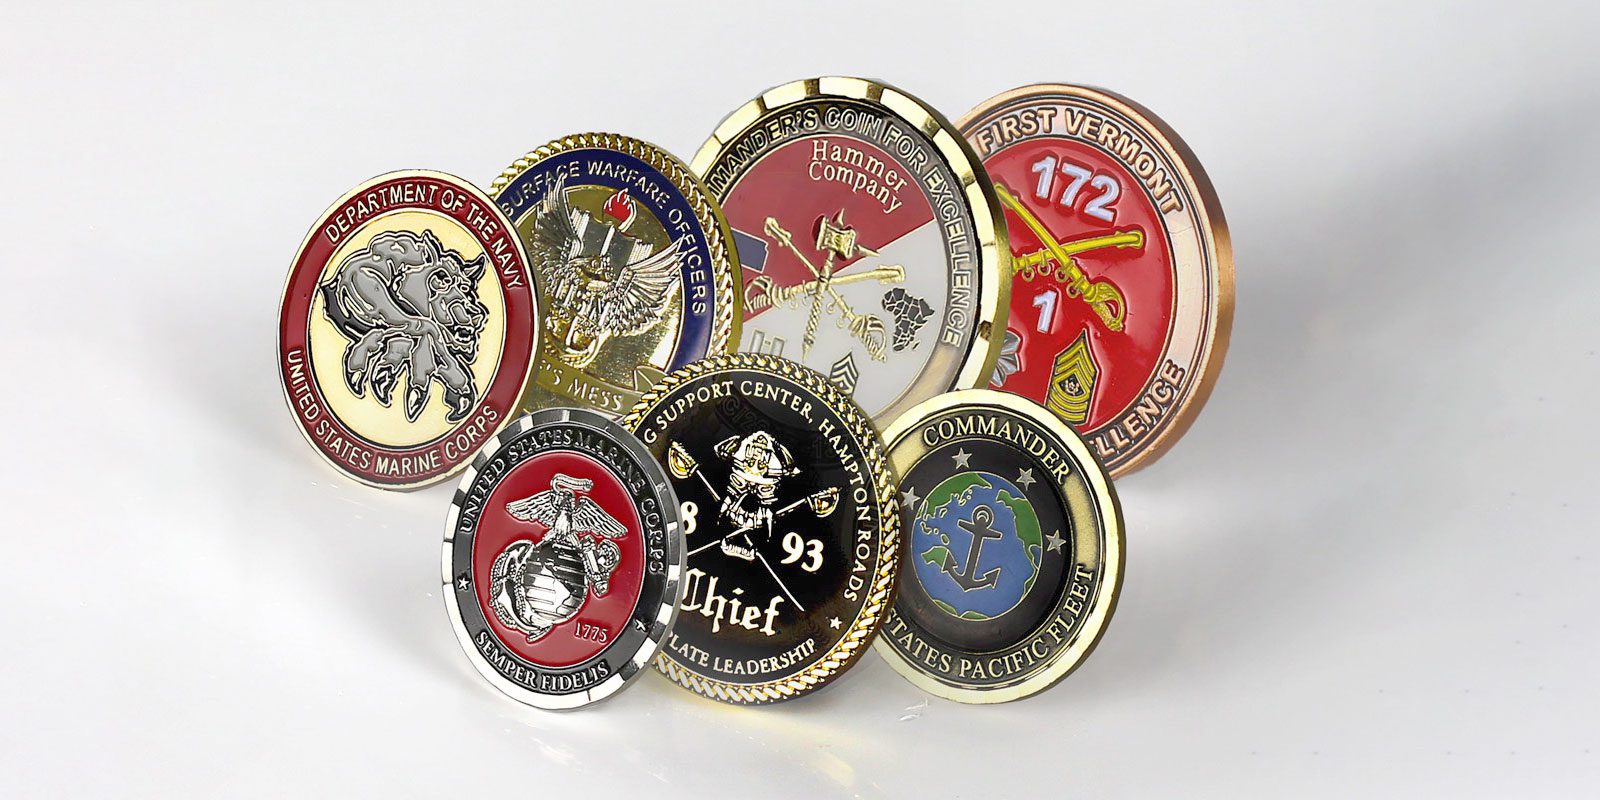 The Challenge Coin Tradition: Do You Know How It Started? > U.S. Department of Defense > Blog